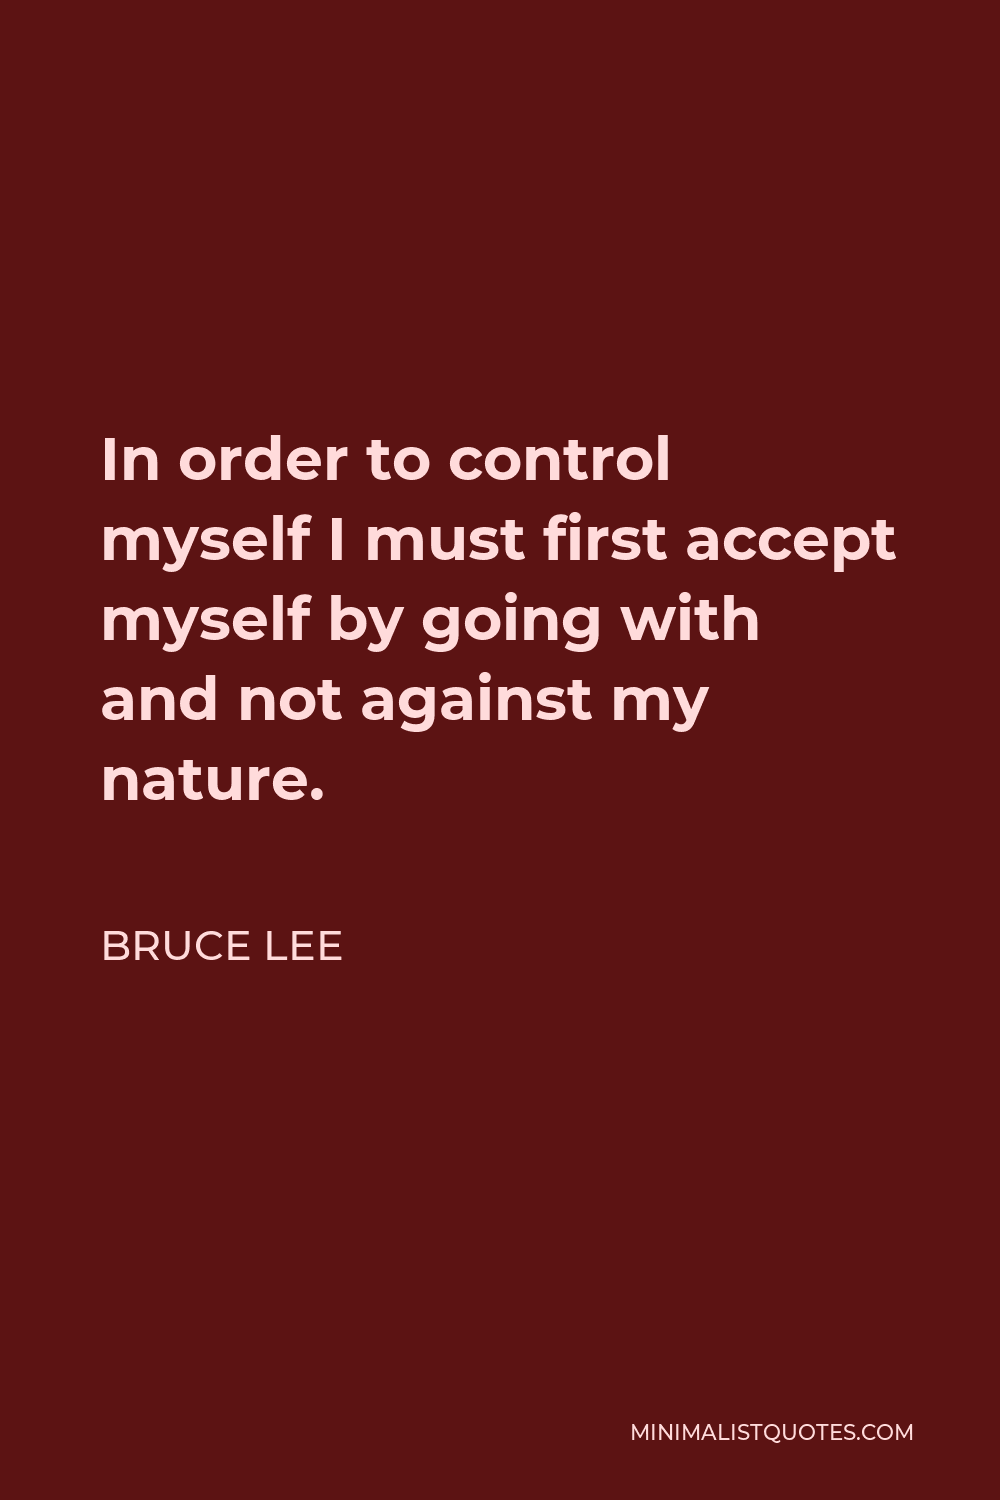 Bruce Lee Quote - In order to control myself I must first accept myself by going with and not against my nature.